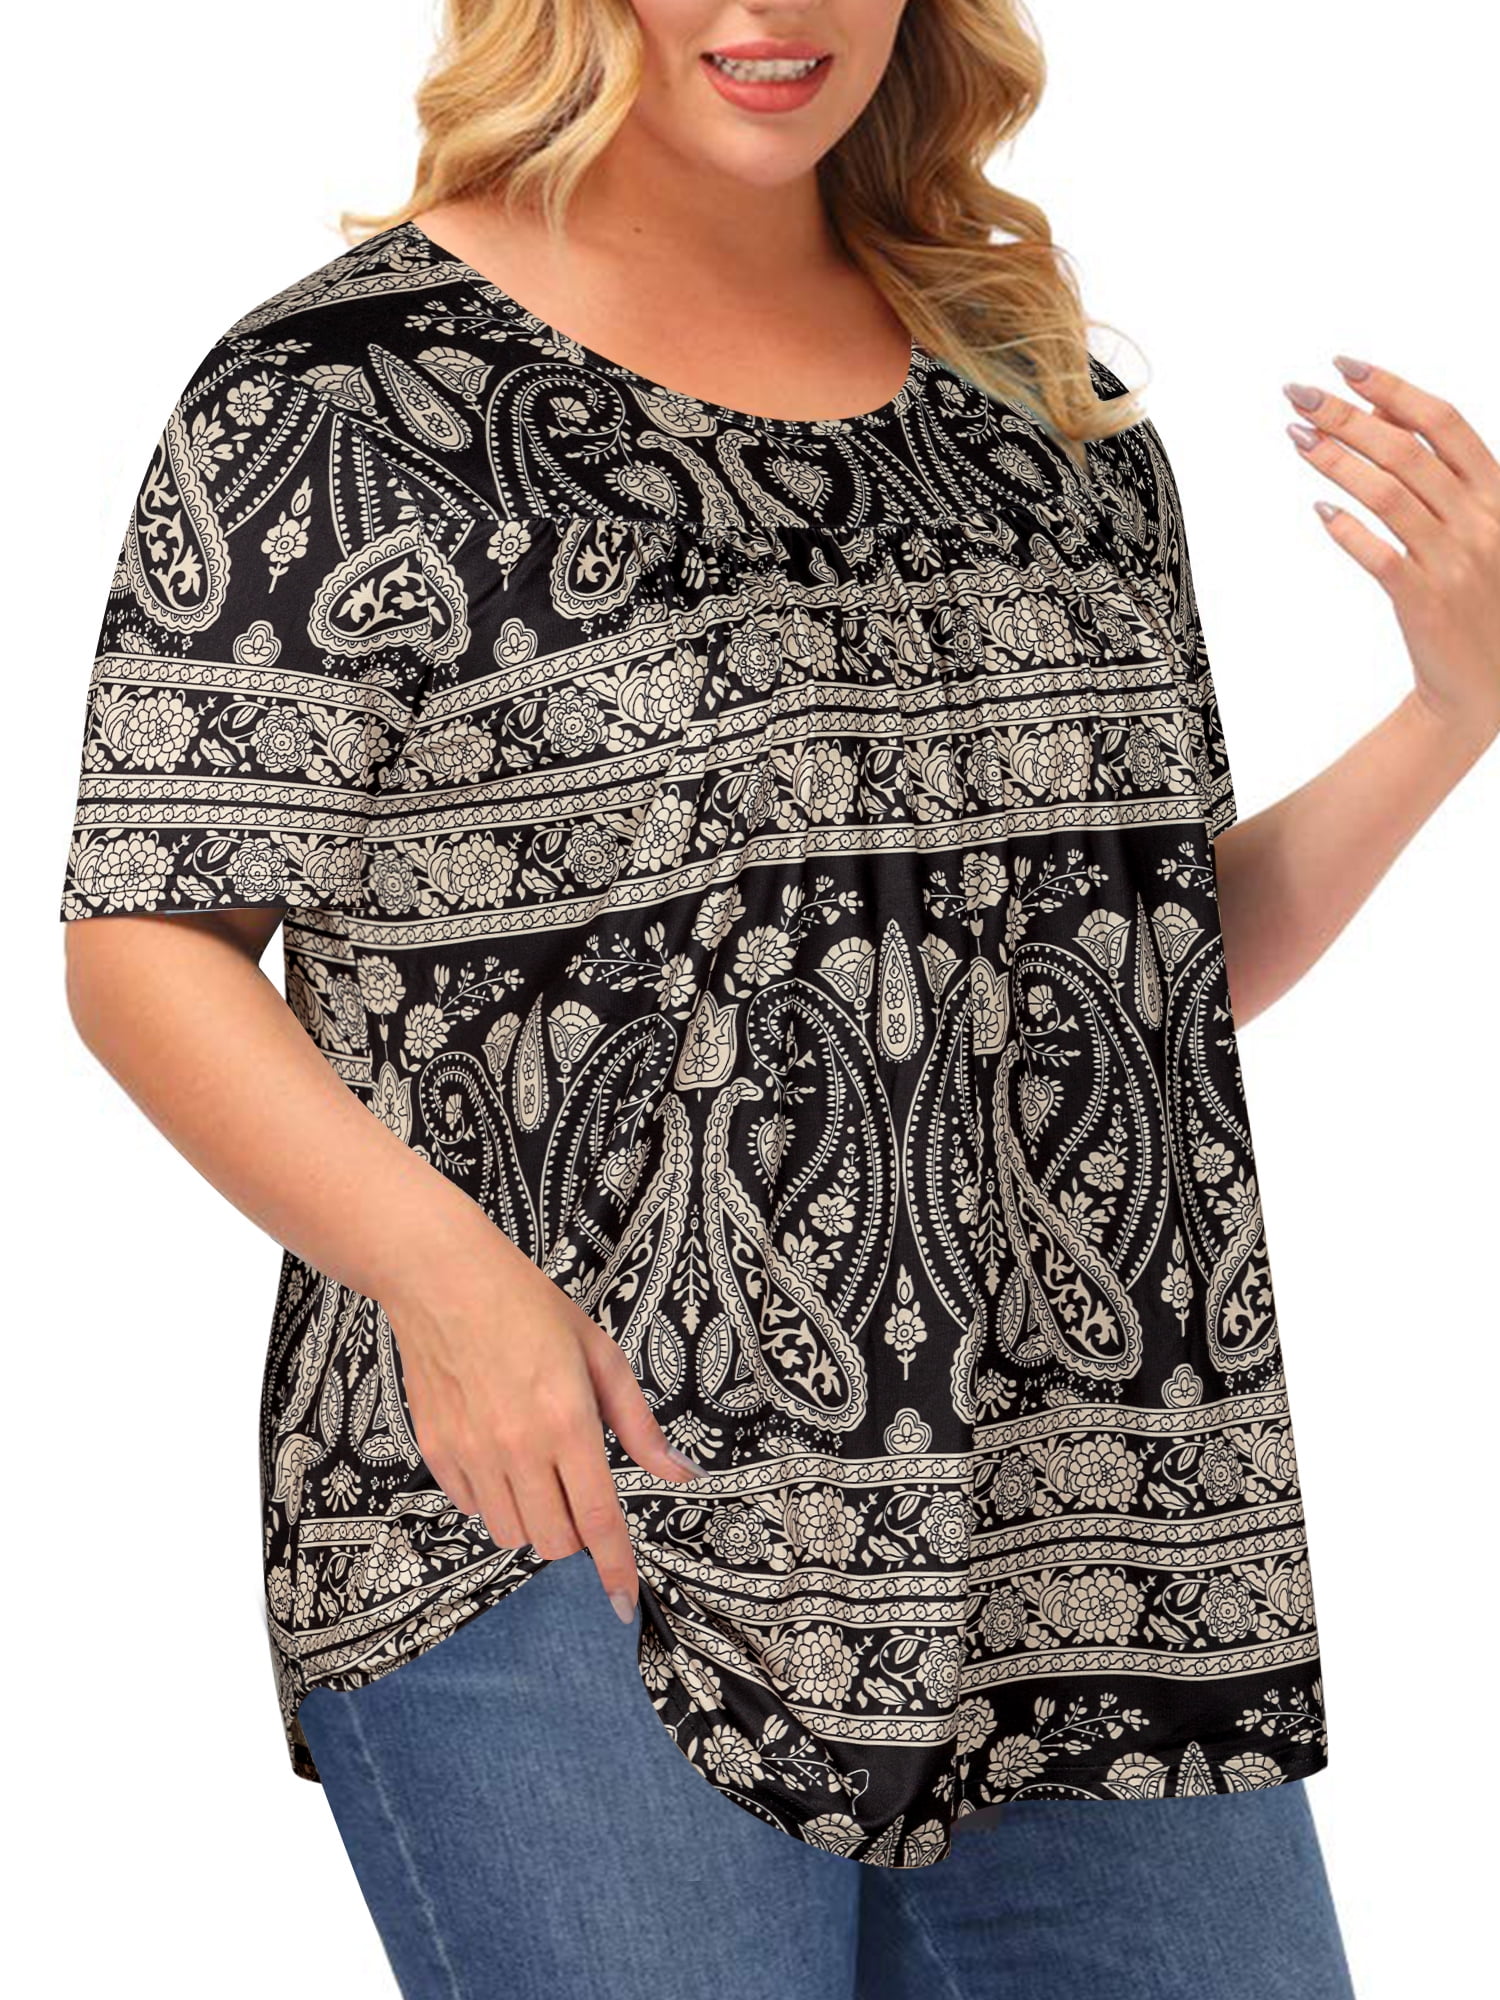 Chama Short Sleeve T Shirt for Women Plus Size Flowy Tunic Tops Casual  Paisley Blouses 